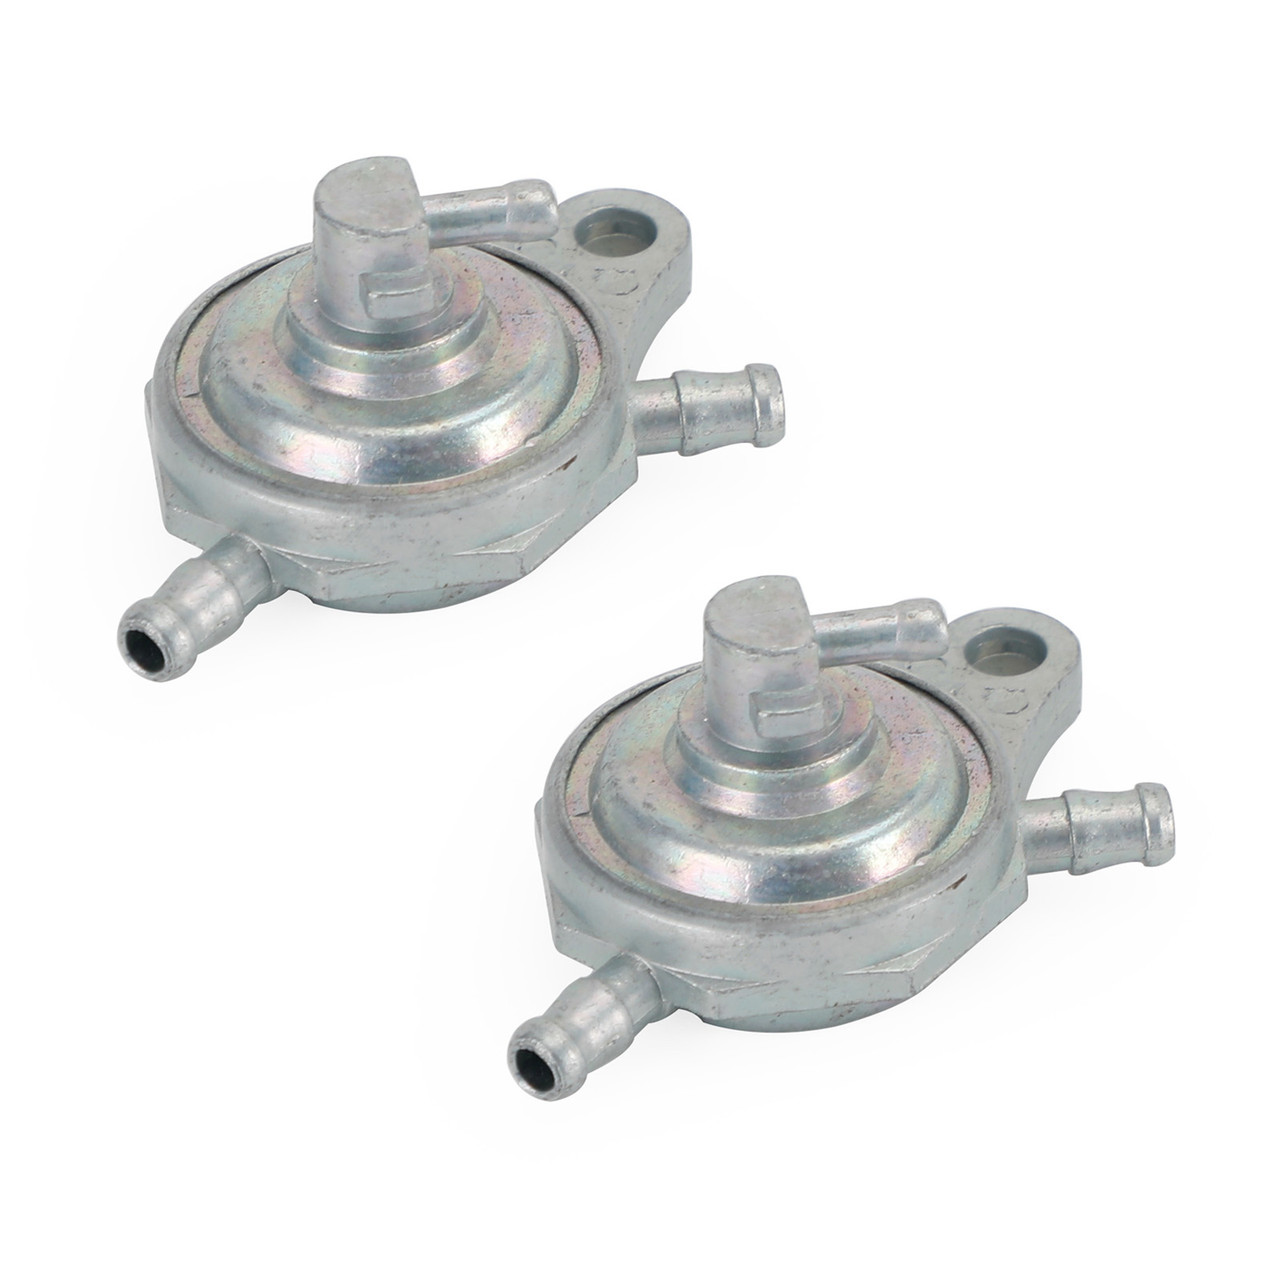 2pcs Fuel Tap Vacuum Petrol Suction 3 Port For Yamaha BWS / MBK Booster 50 2T